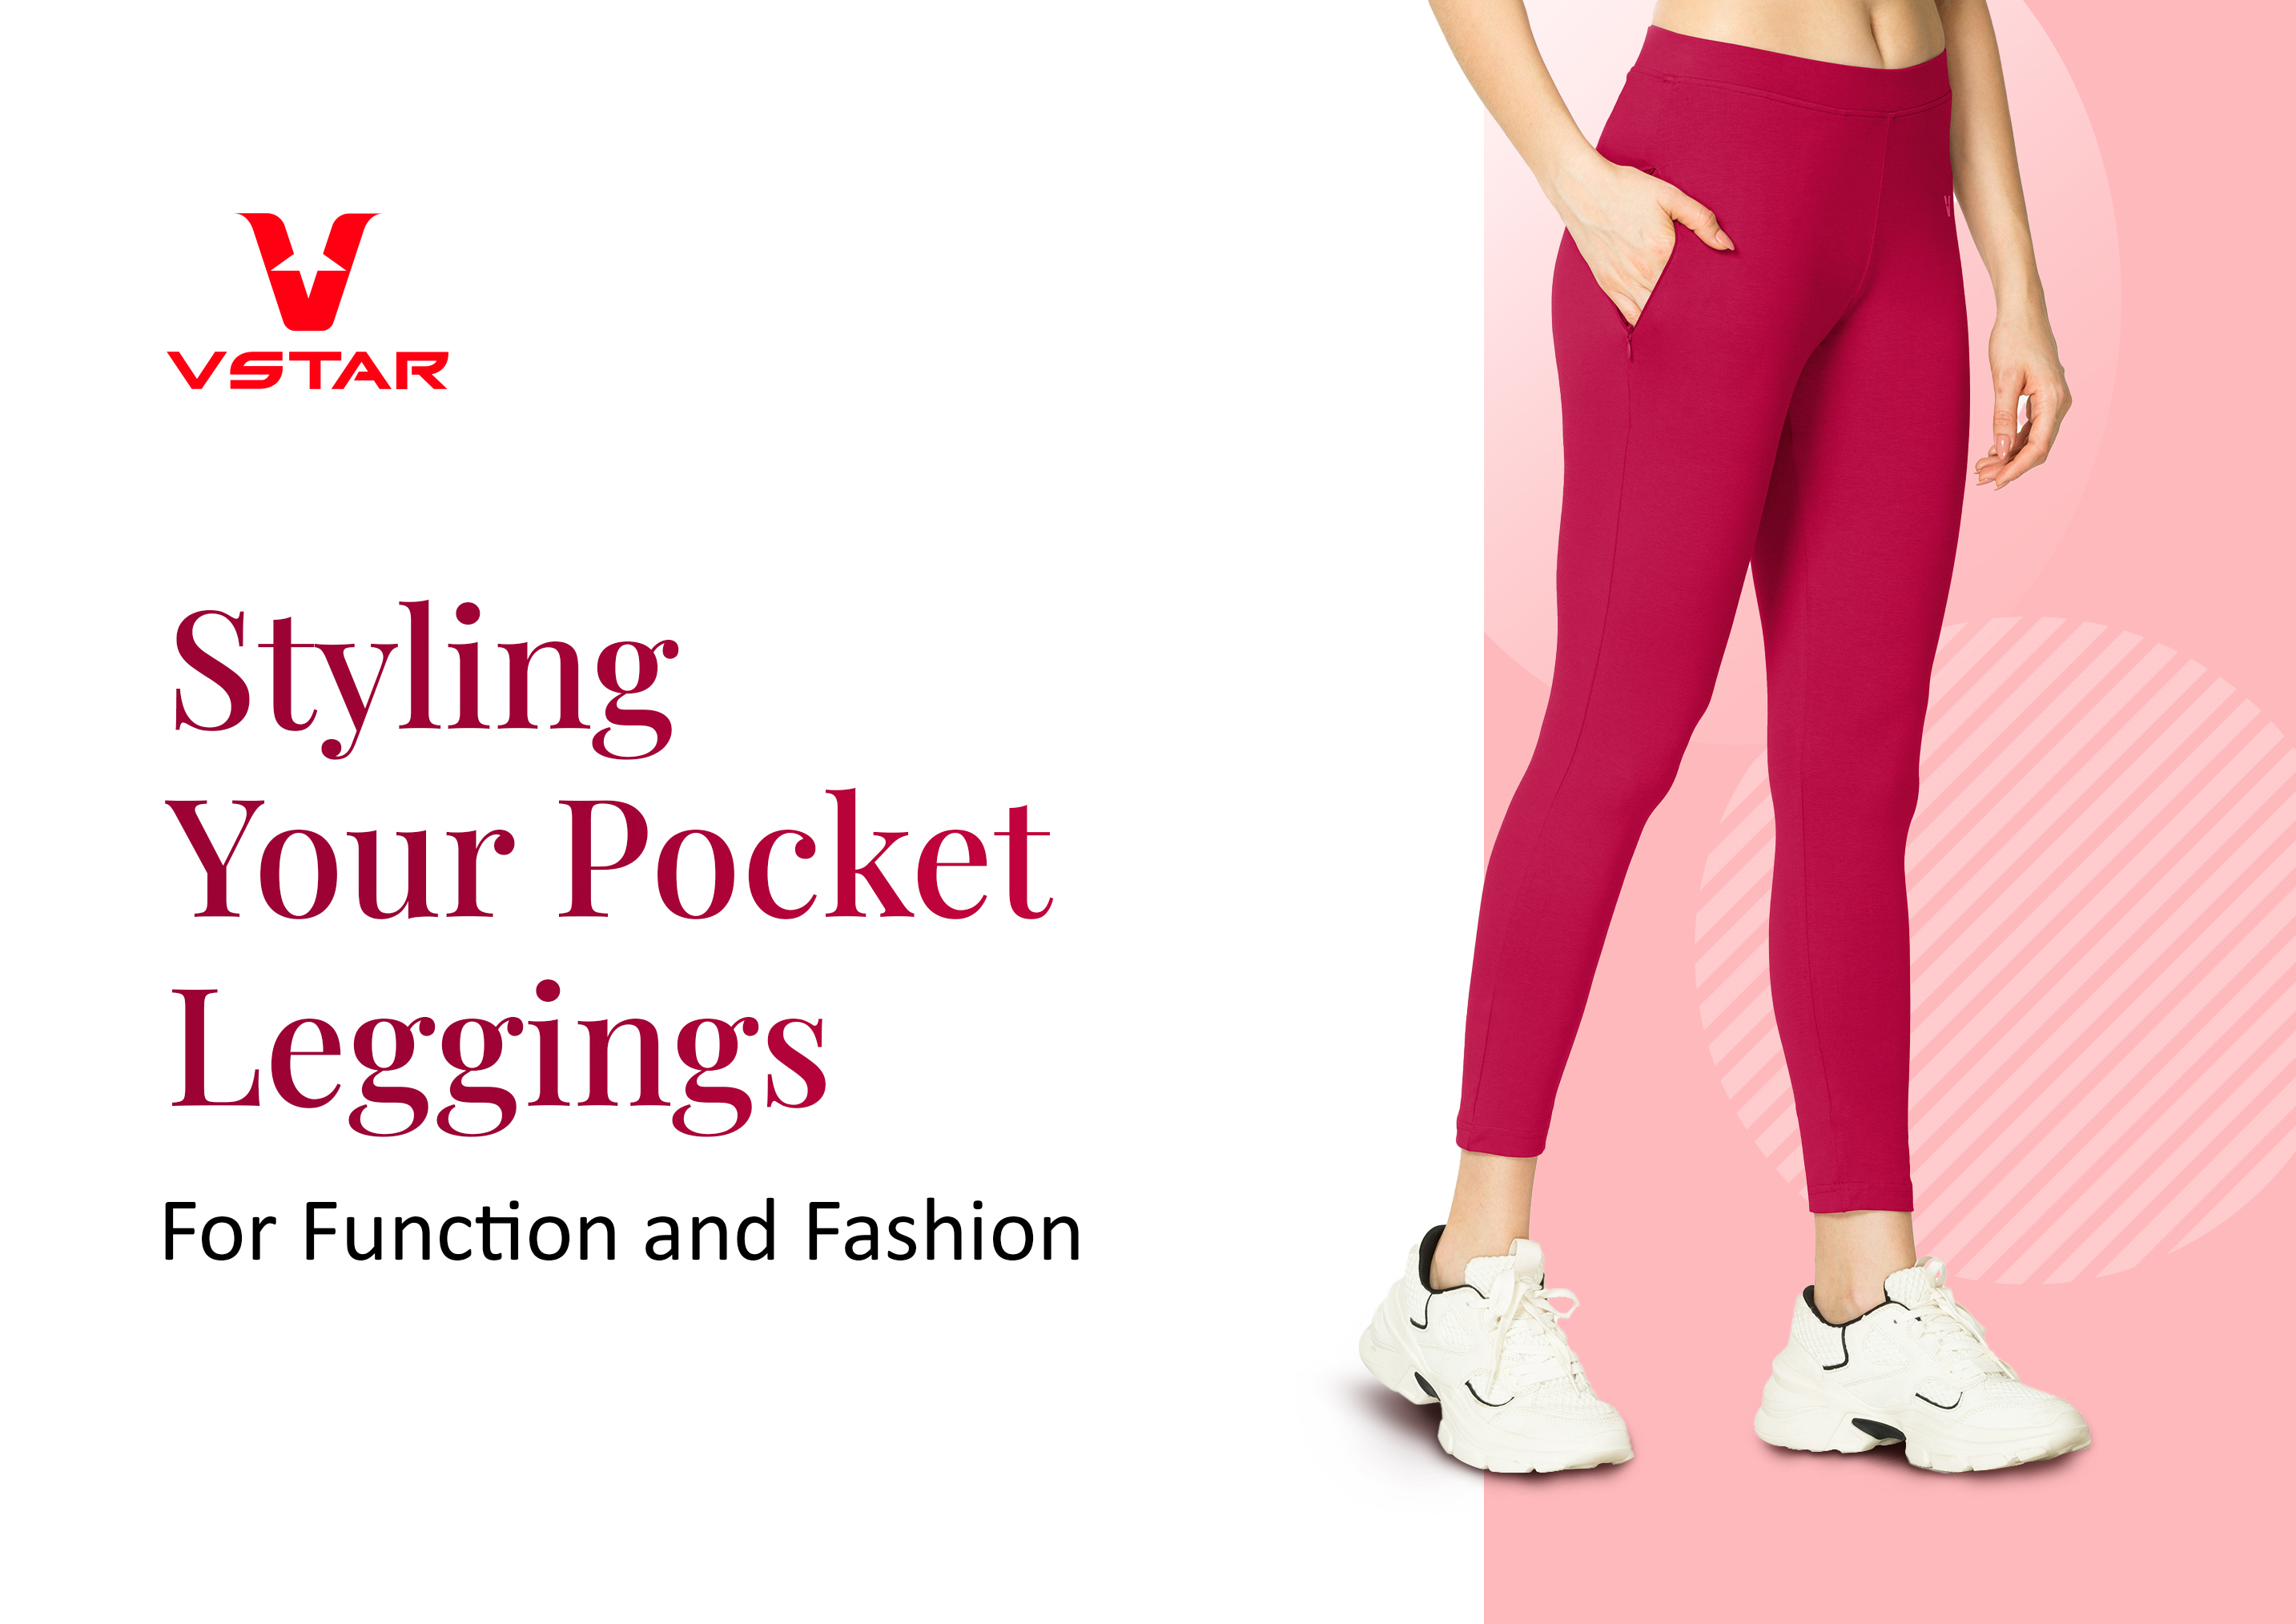 Why Do Leggings Have A Small Pocket Option